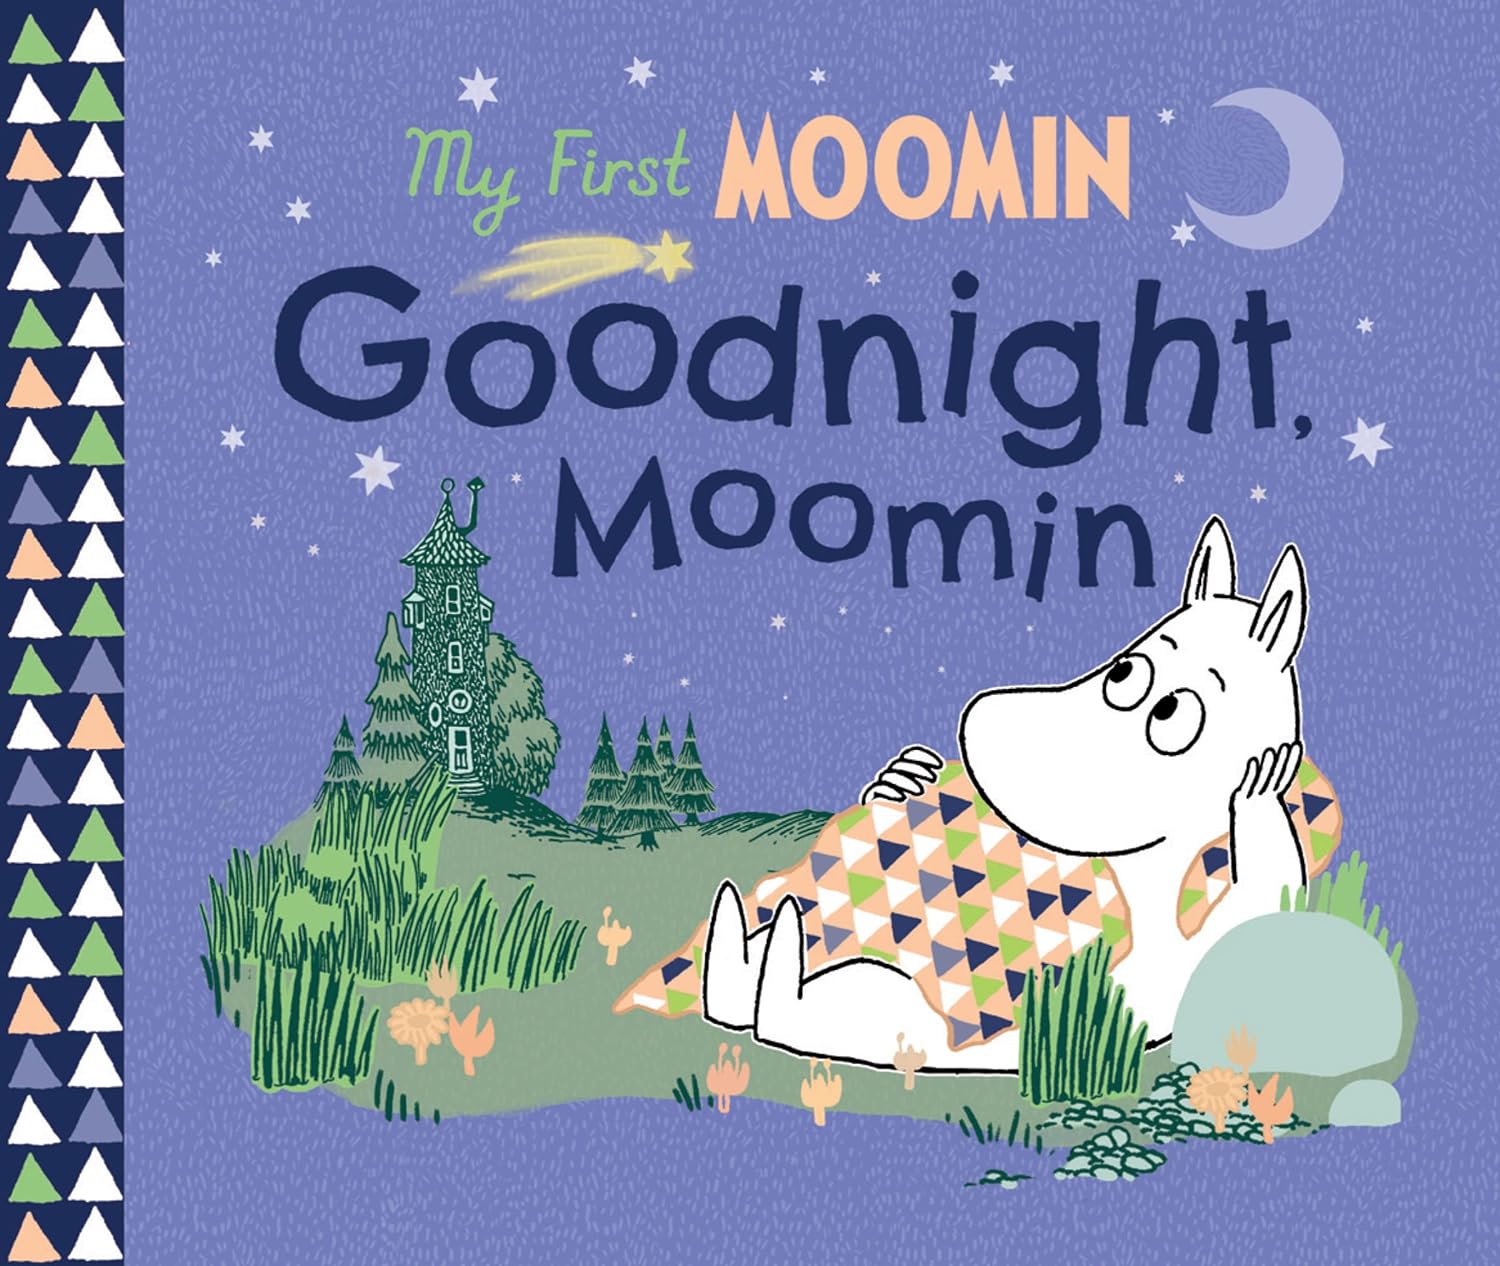 My First Moomin: Goodnight, Moomin - by Tove Jansson (Board Book)